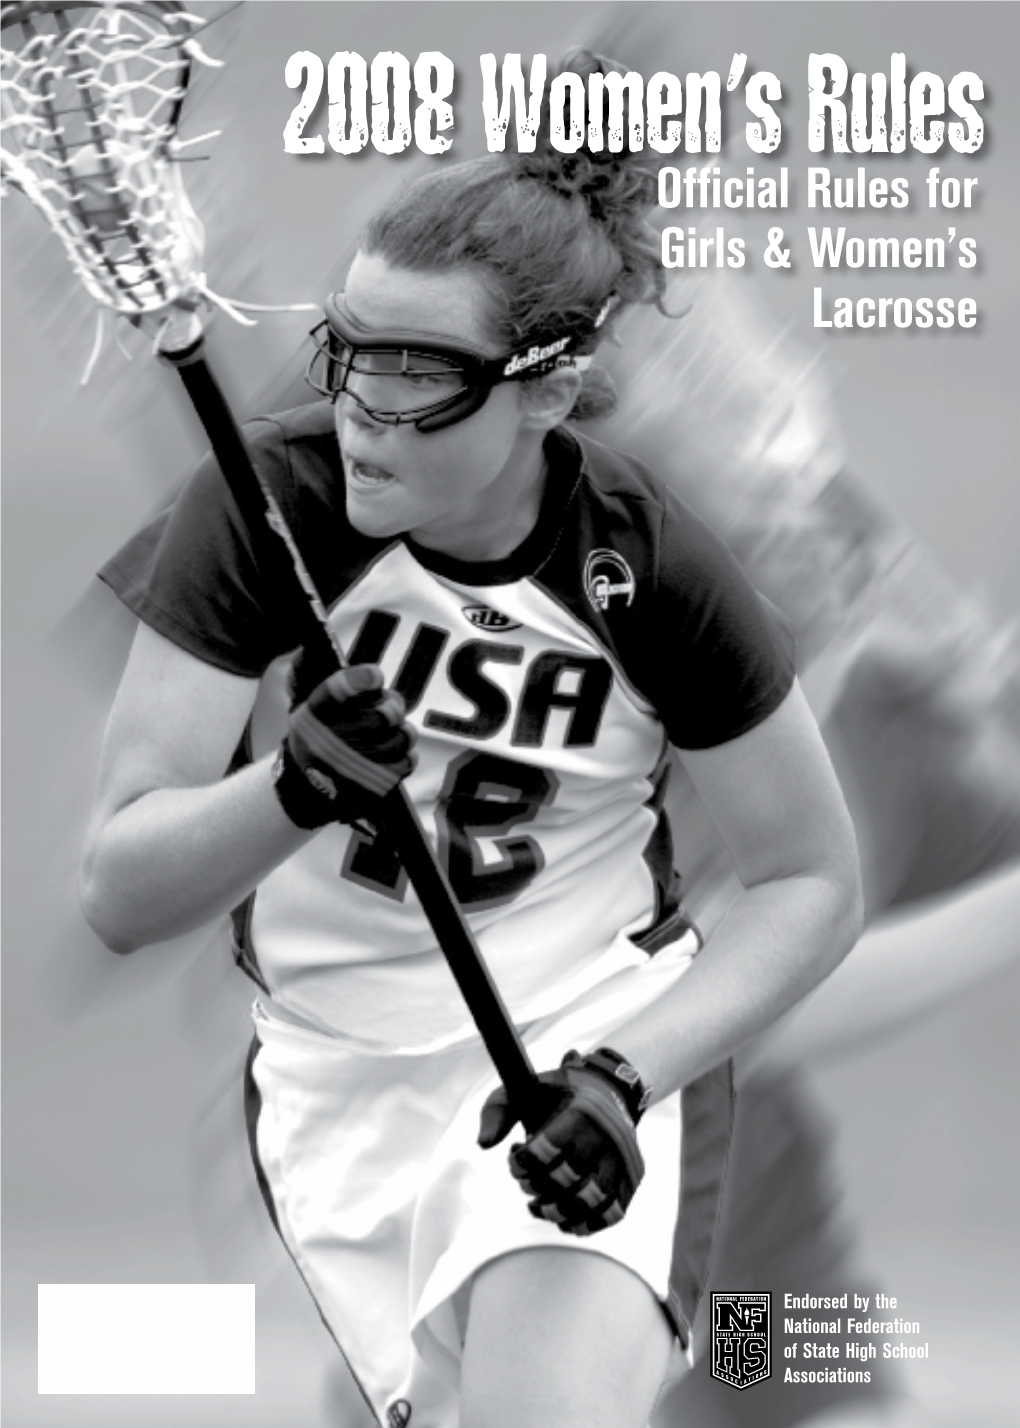 Official Rules for Girls & Women's Lacrosse